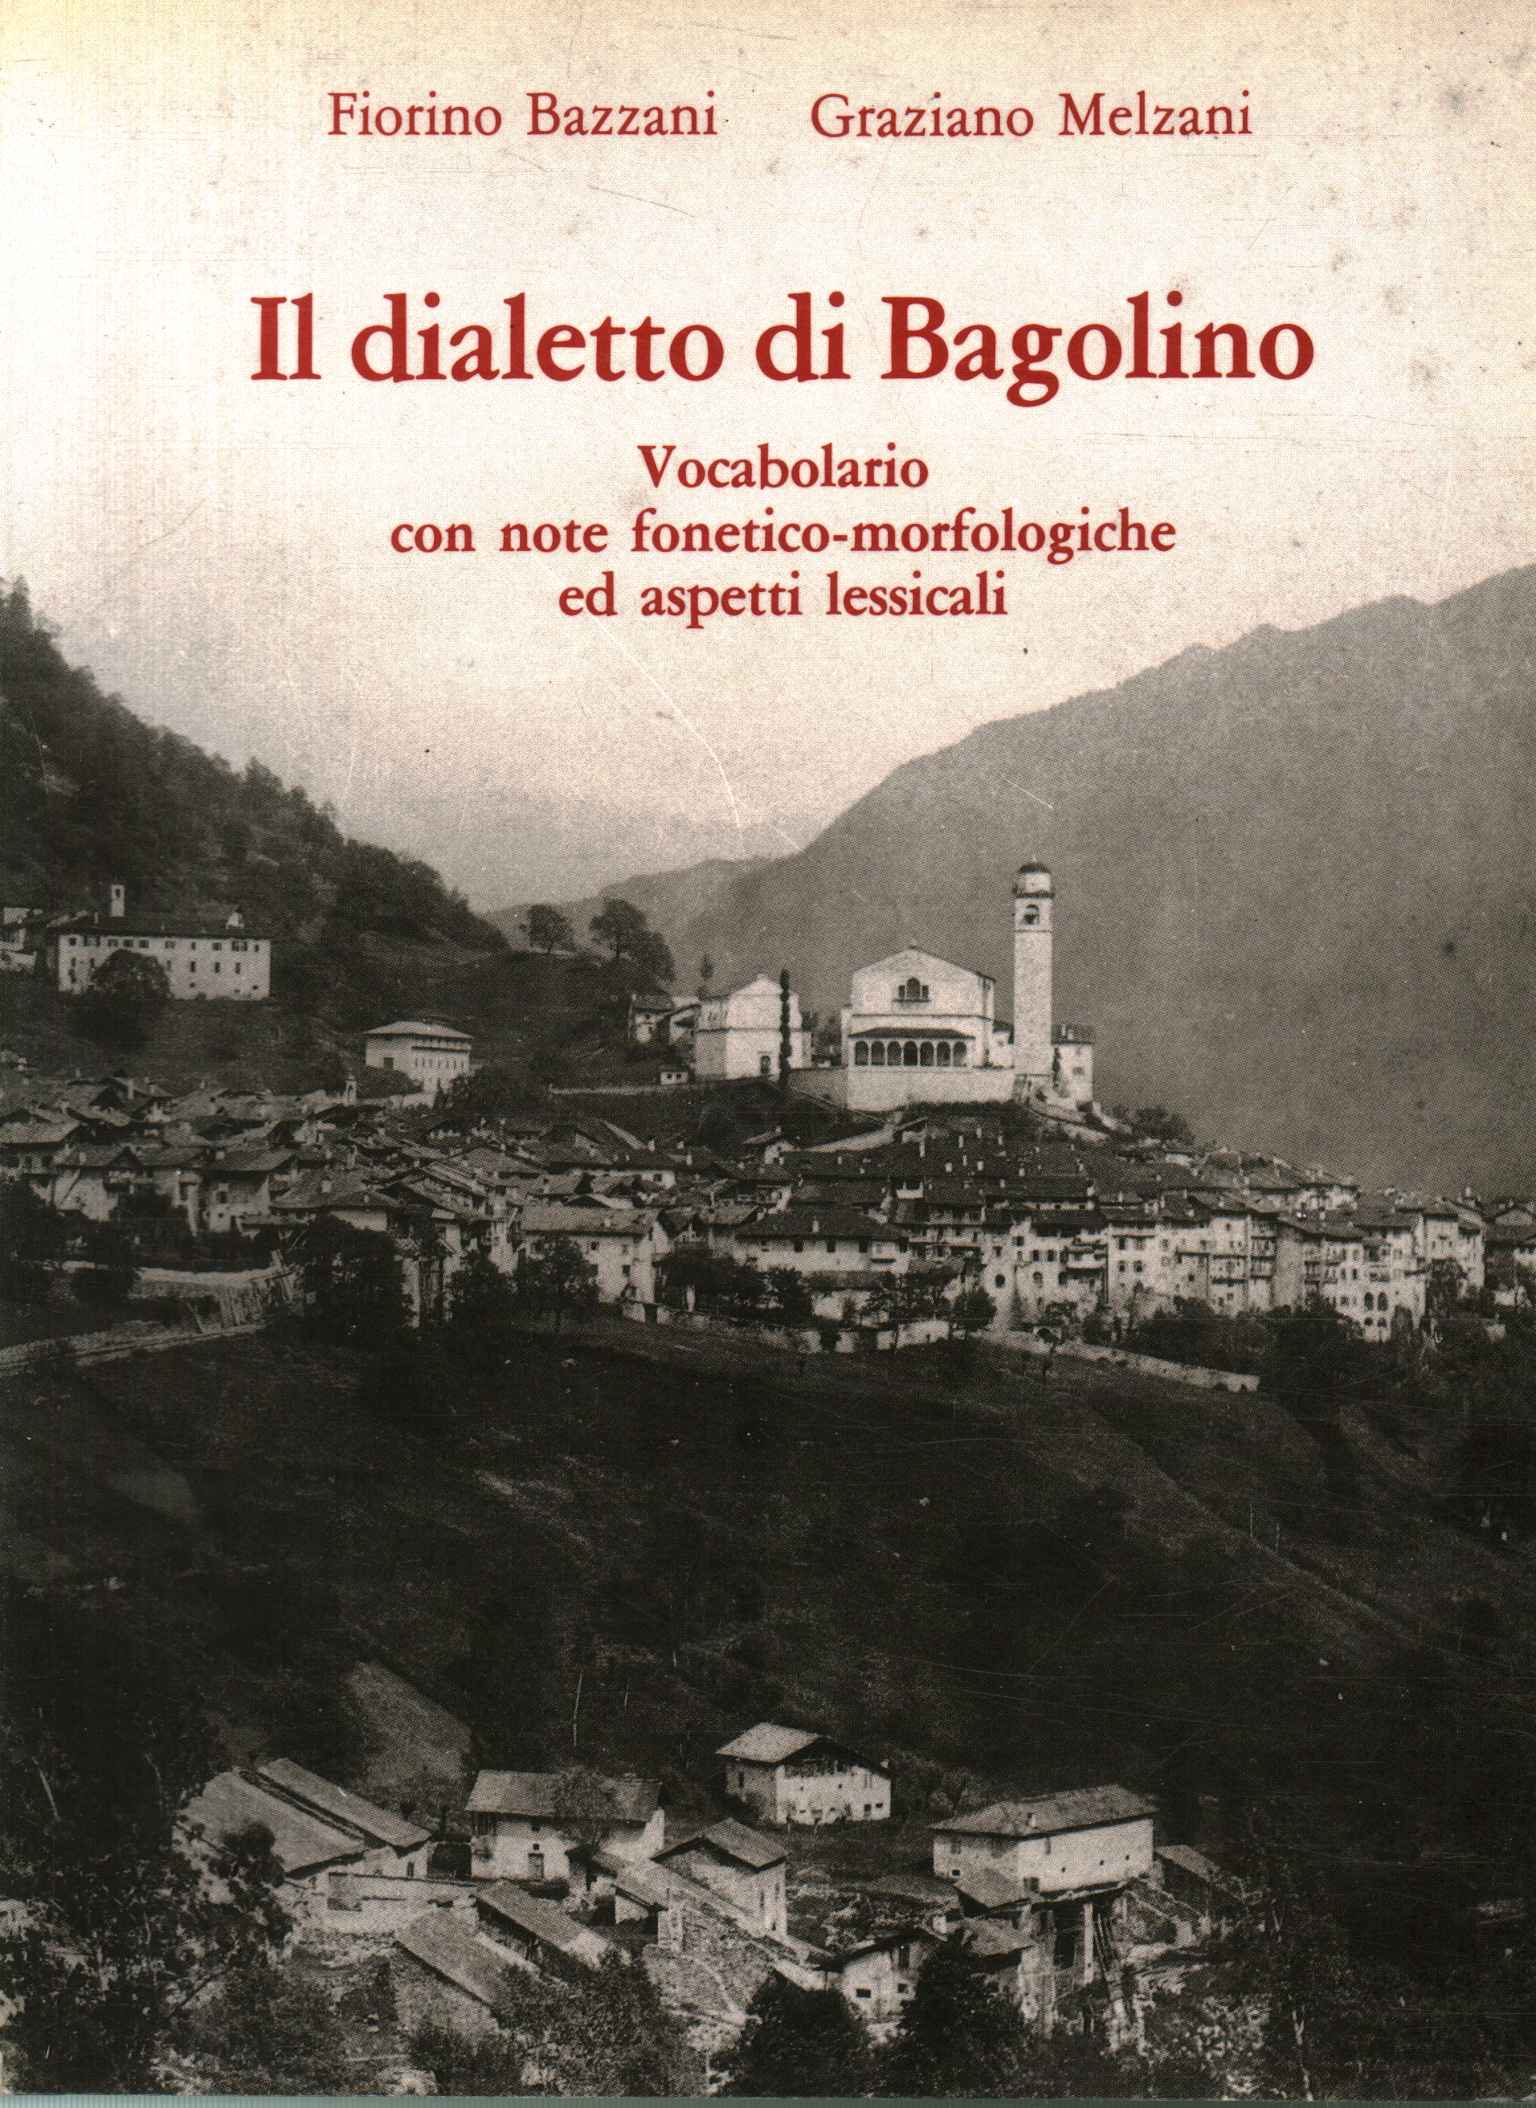 The Bagolino dialect